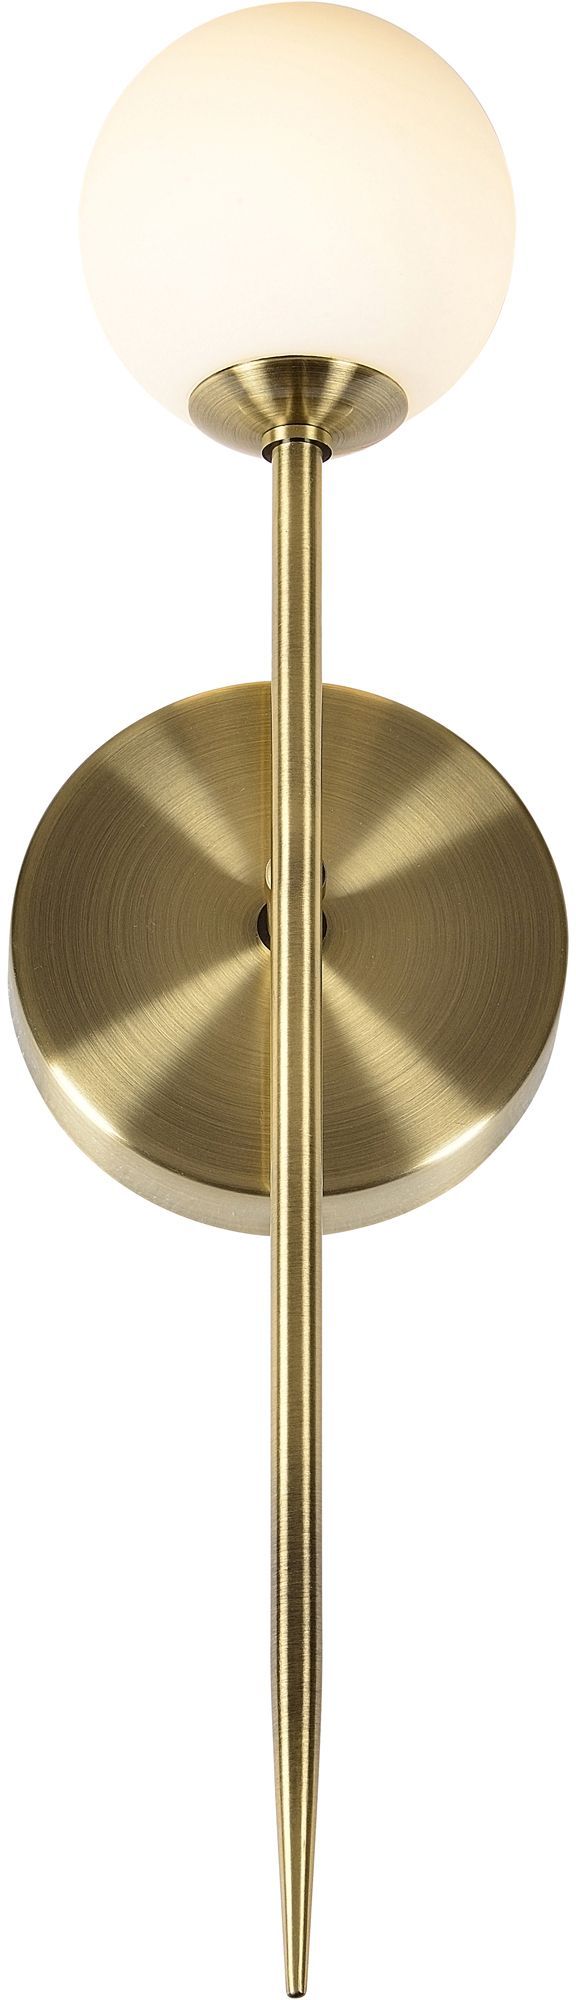 Renwil® Gianni Antique Brass Wall Sconce 1